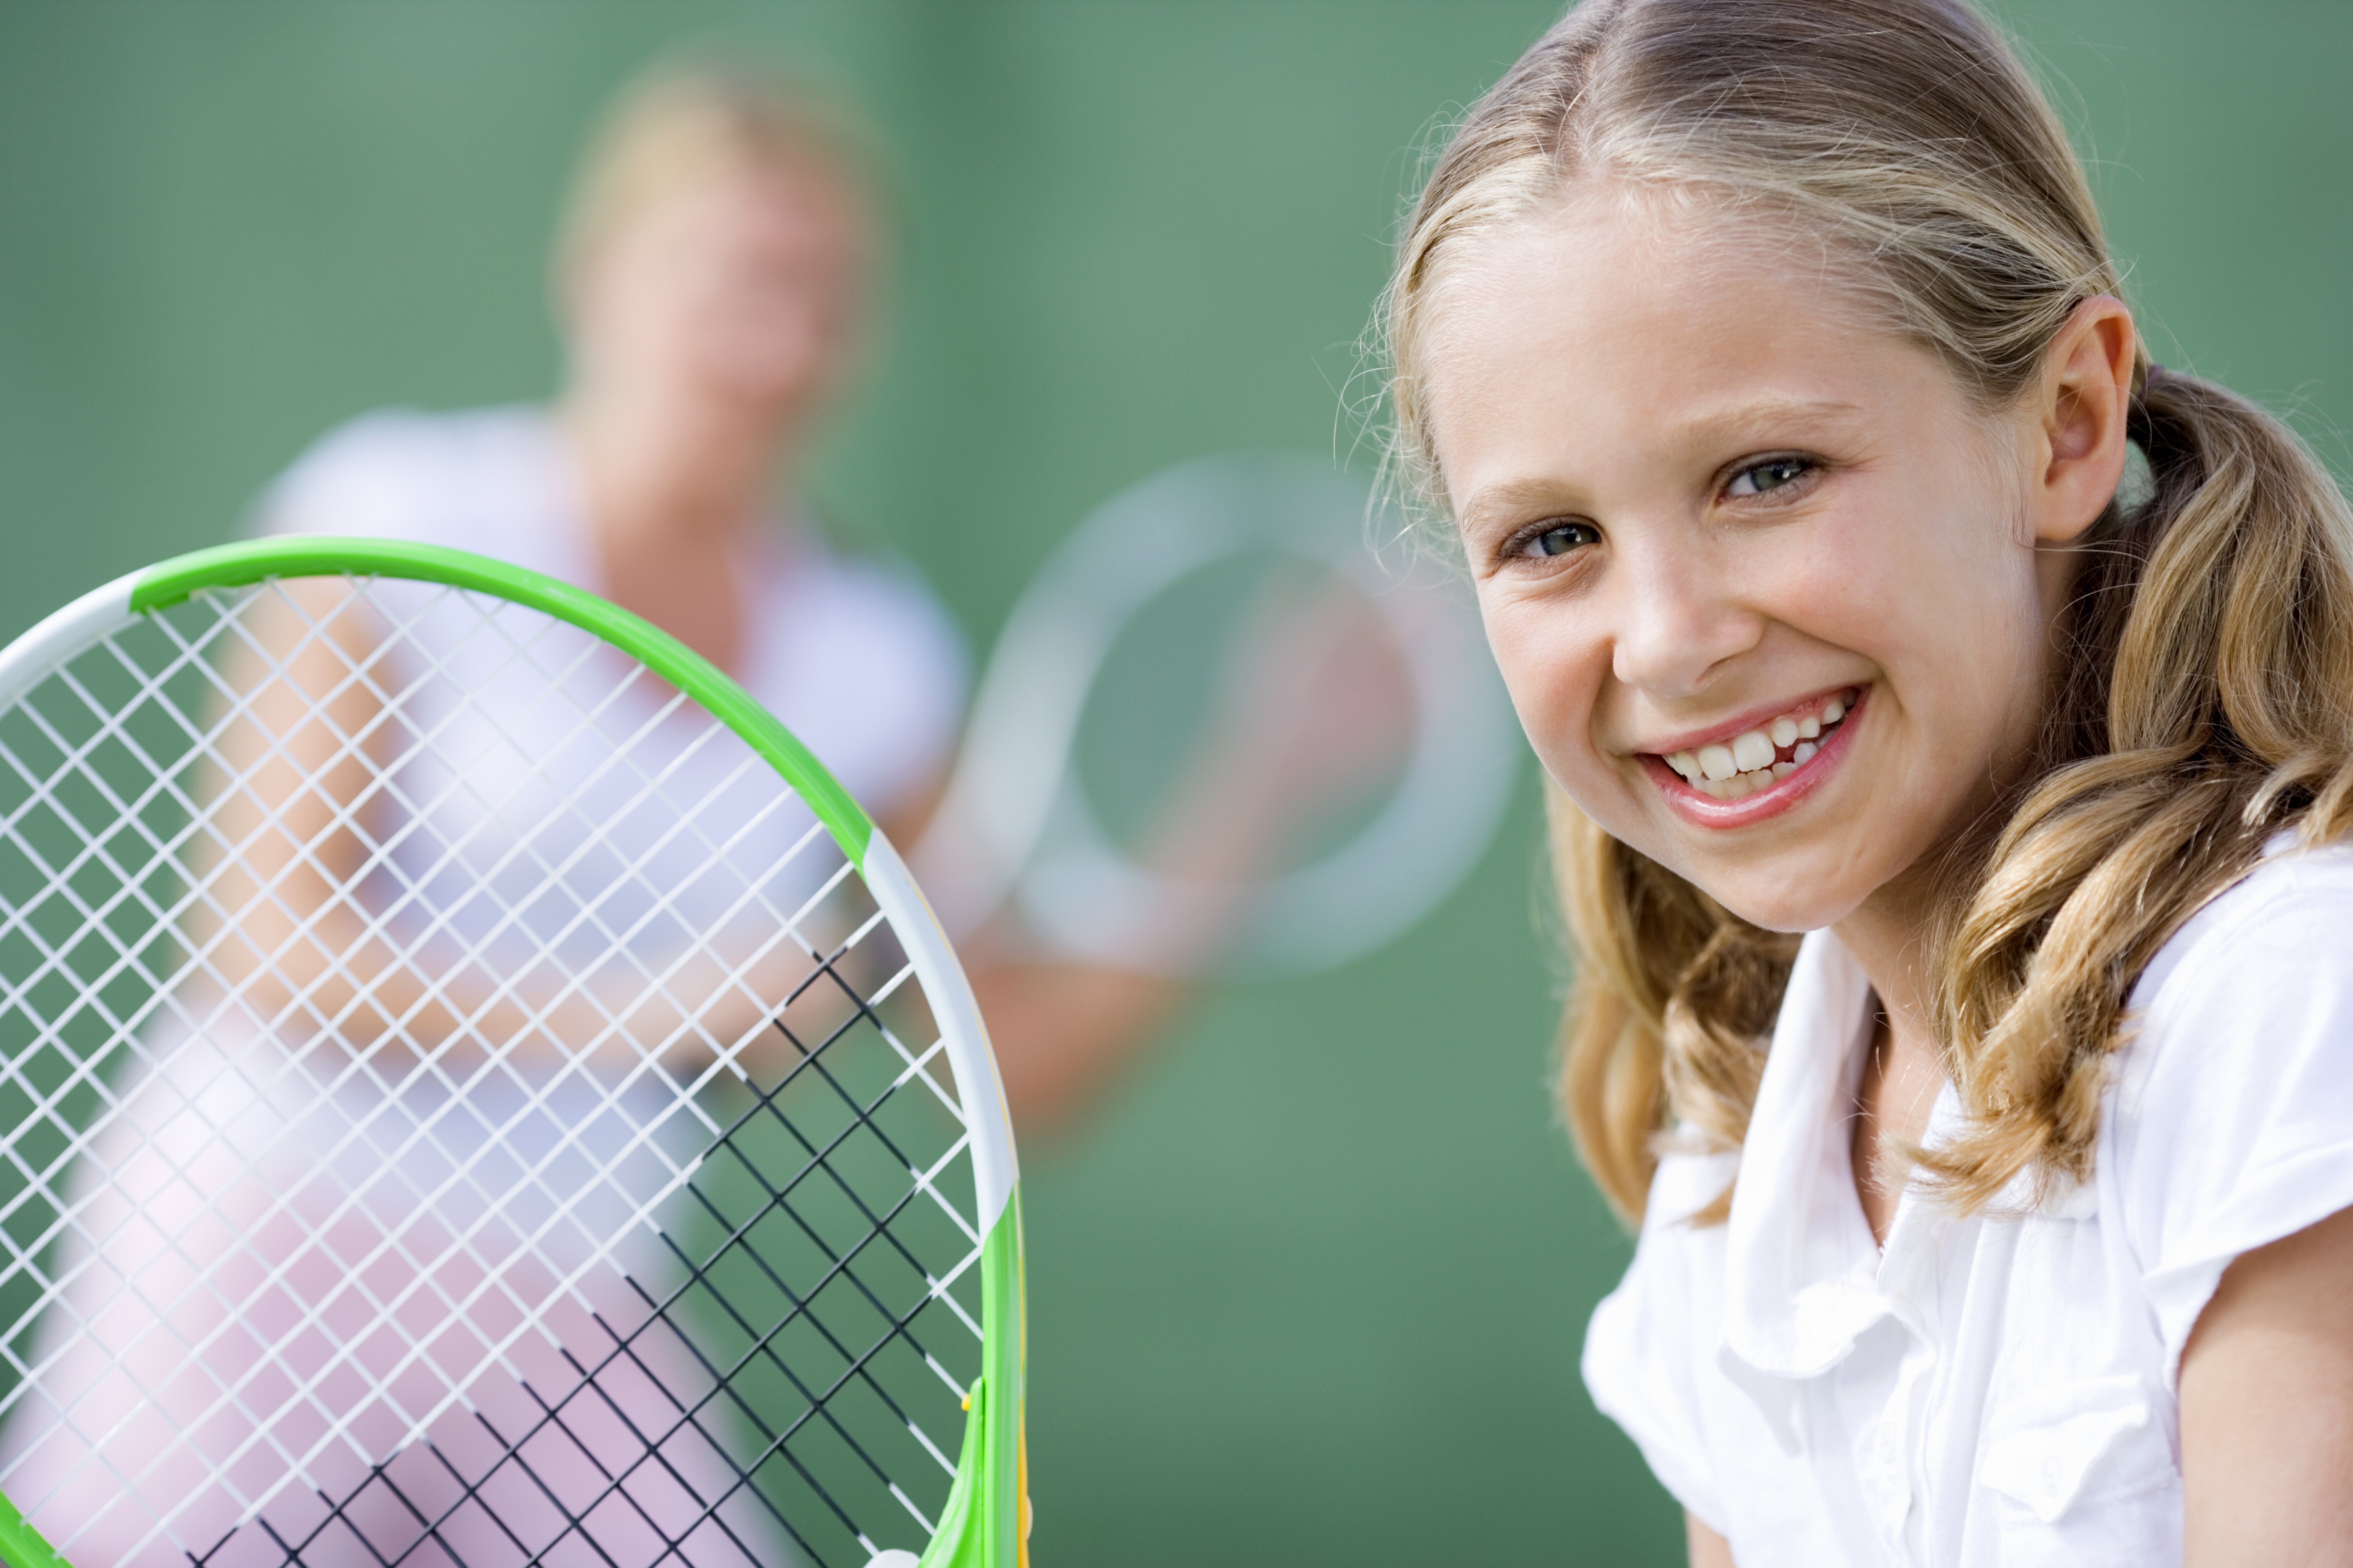 How to Buy a Kid's Tennis Racket